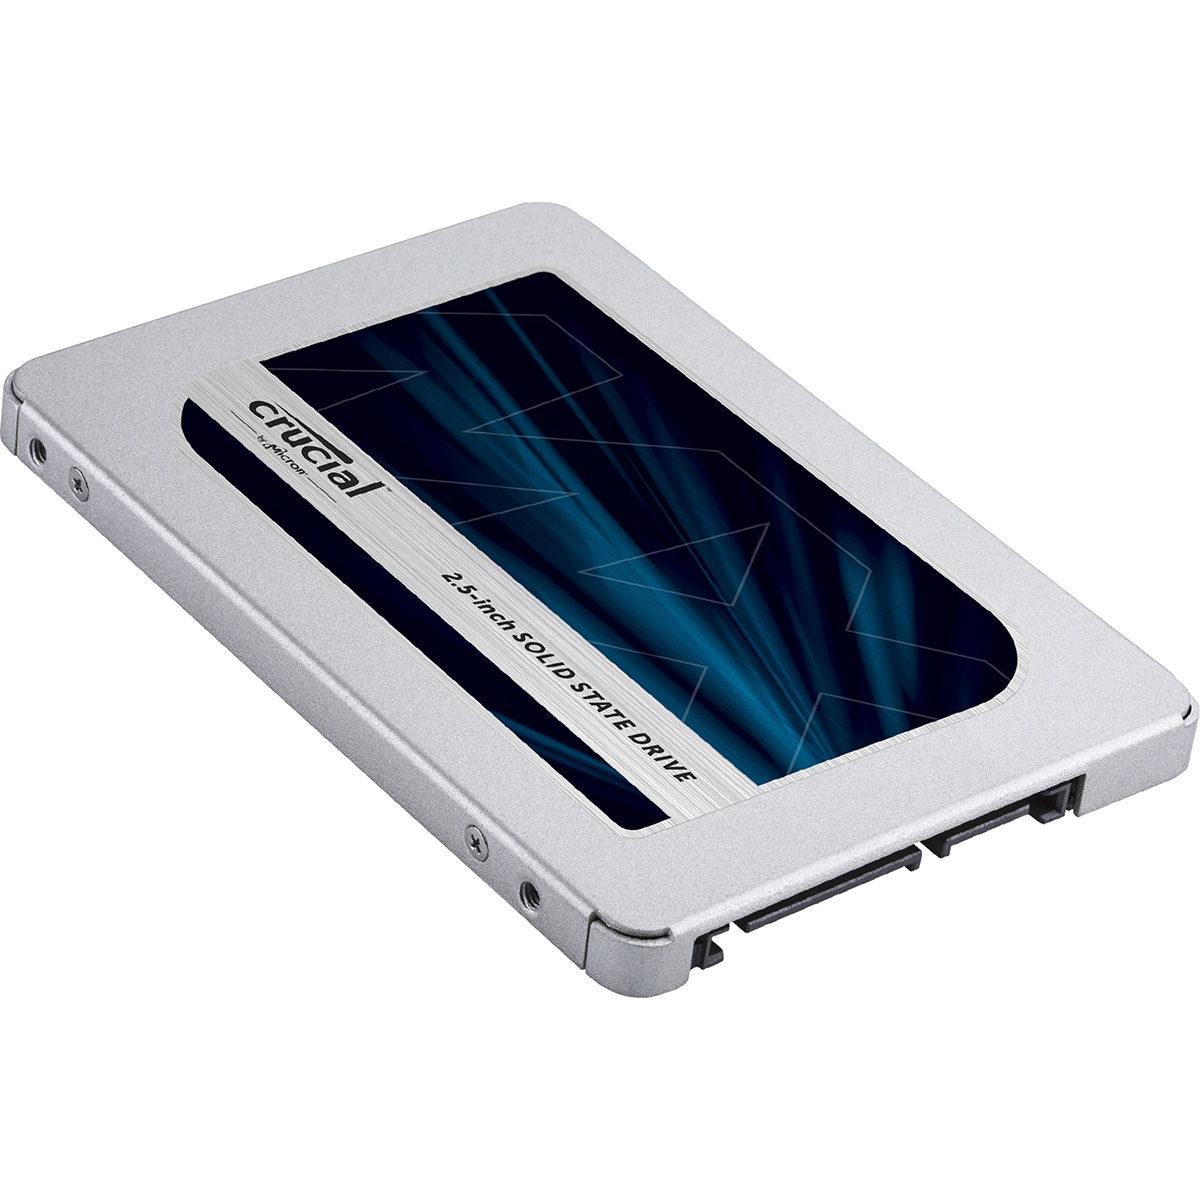 ■MX500 2000GB SATA 2.5 7mm (with 9.5mm adapter) SSD